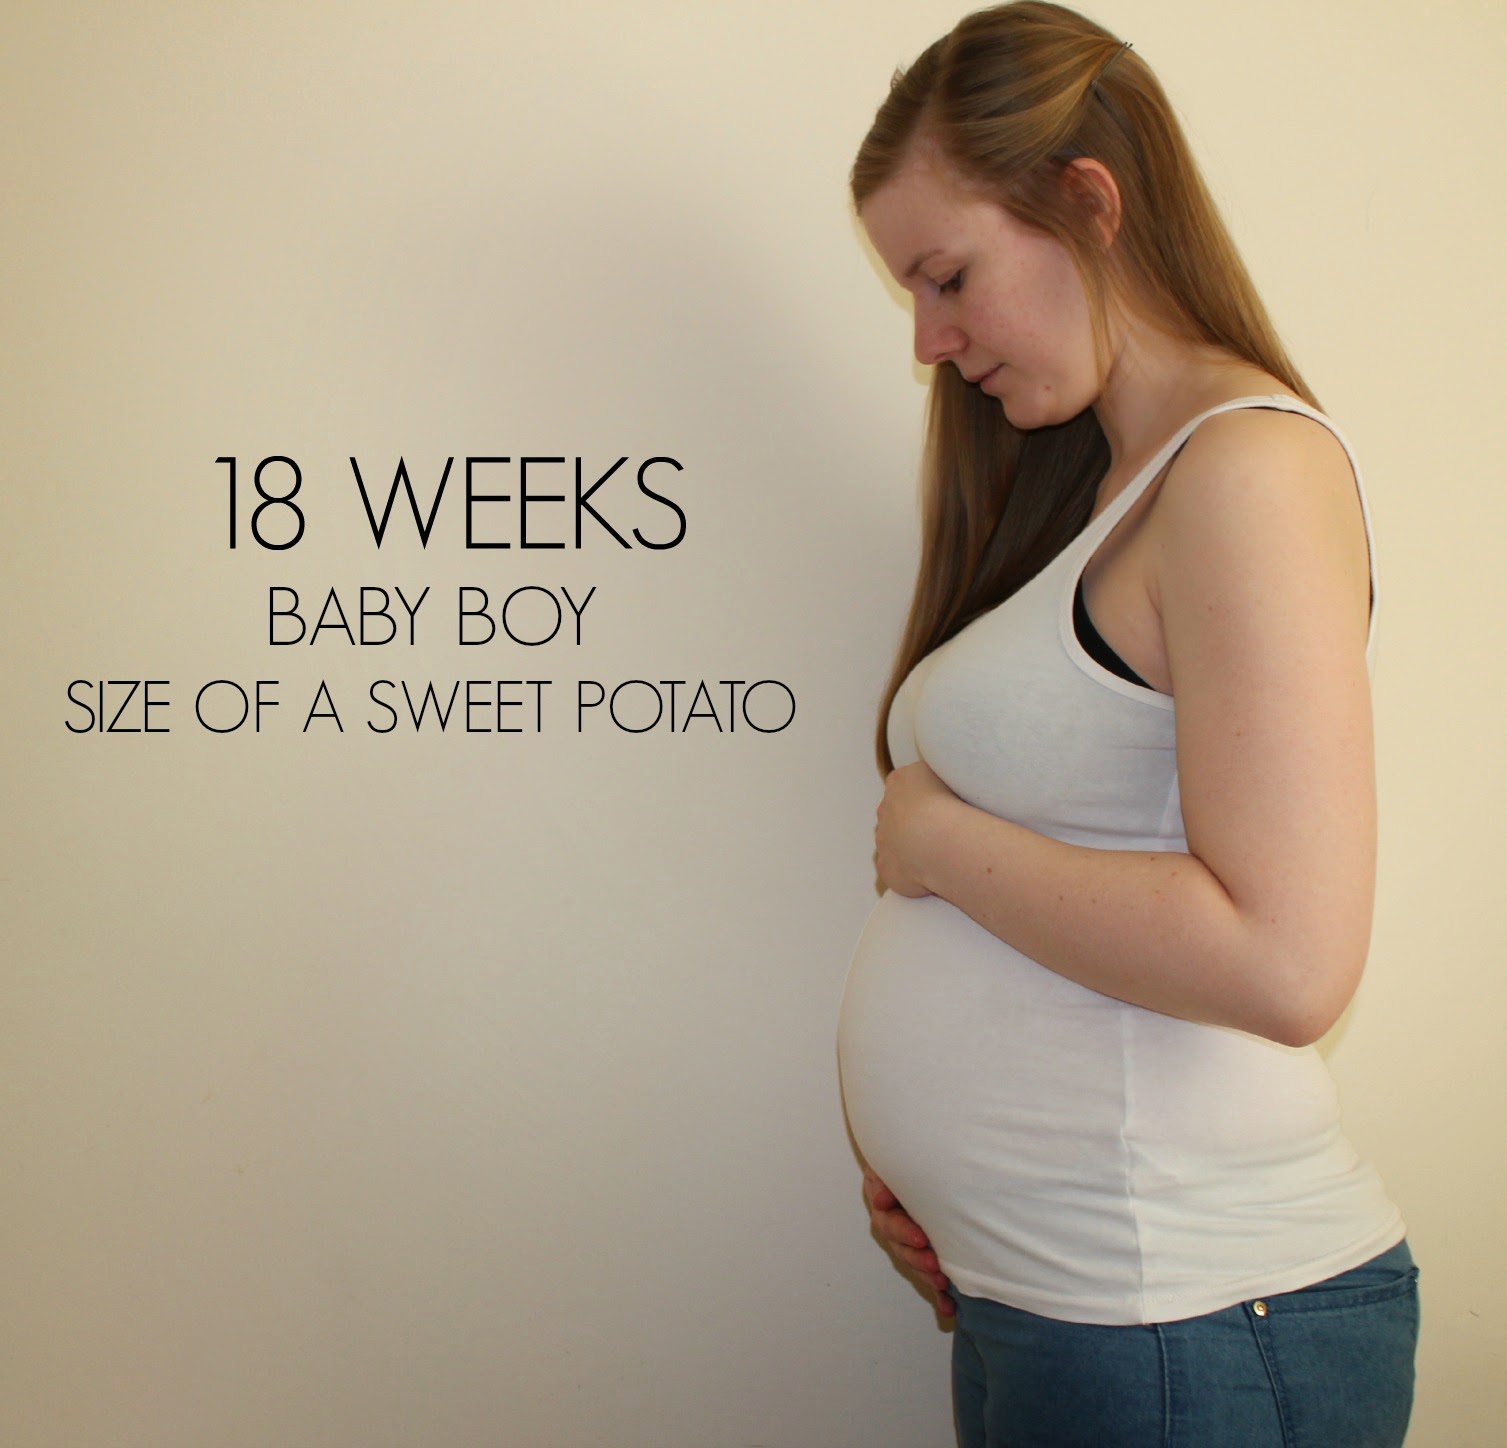 Baby Size And Development At 18 Weeks